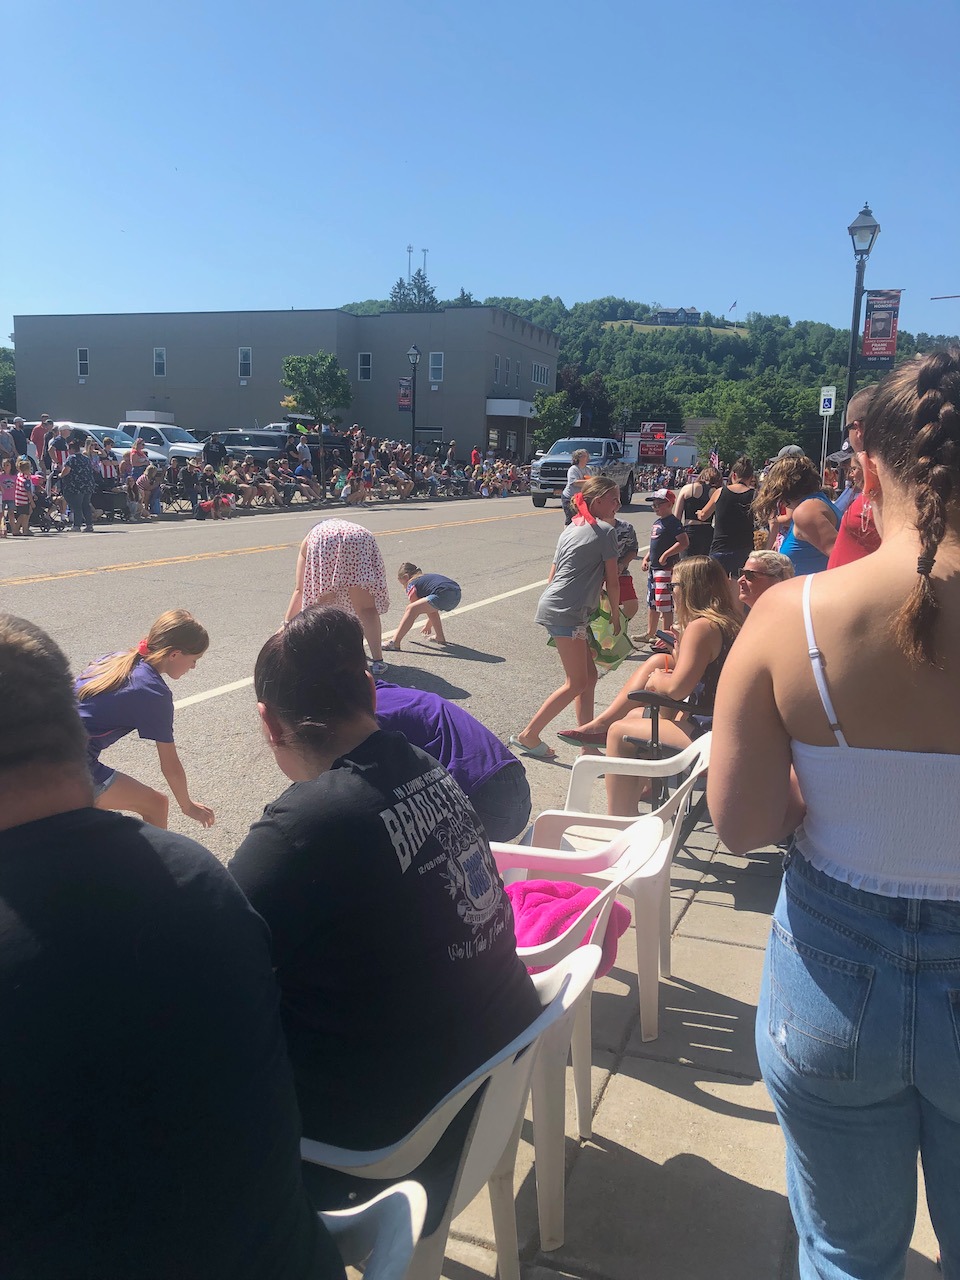 Andover 4th of July parade draws huge crowds THE WELLSVILLE SUN